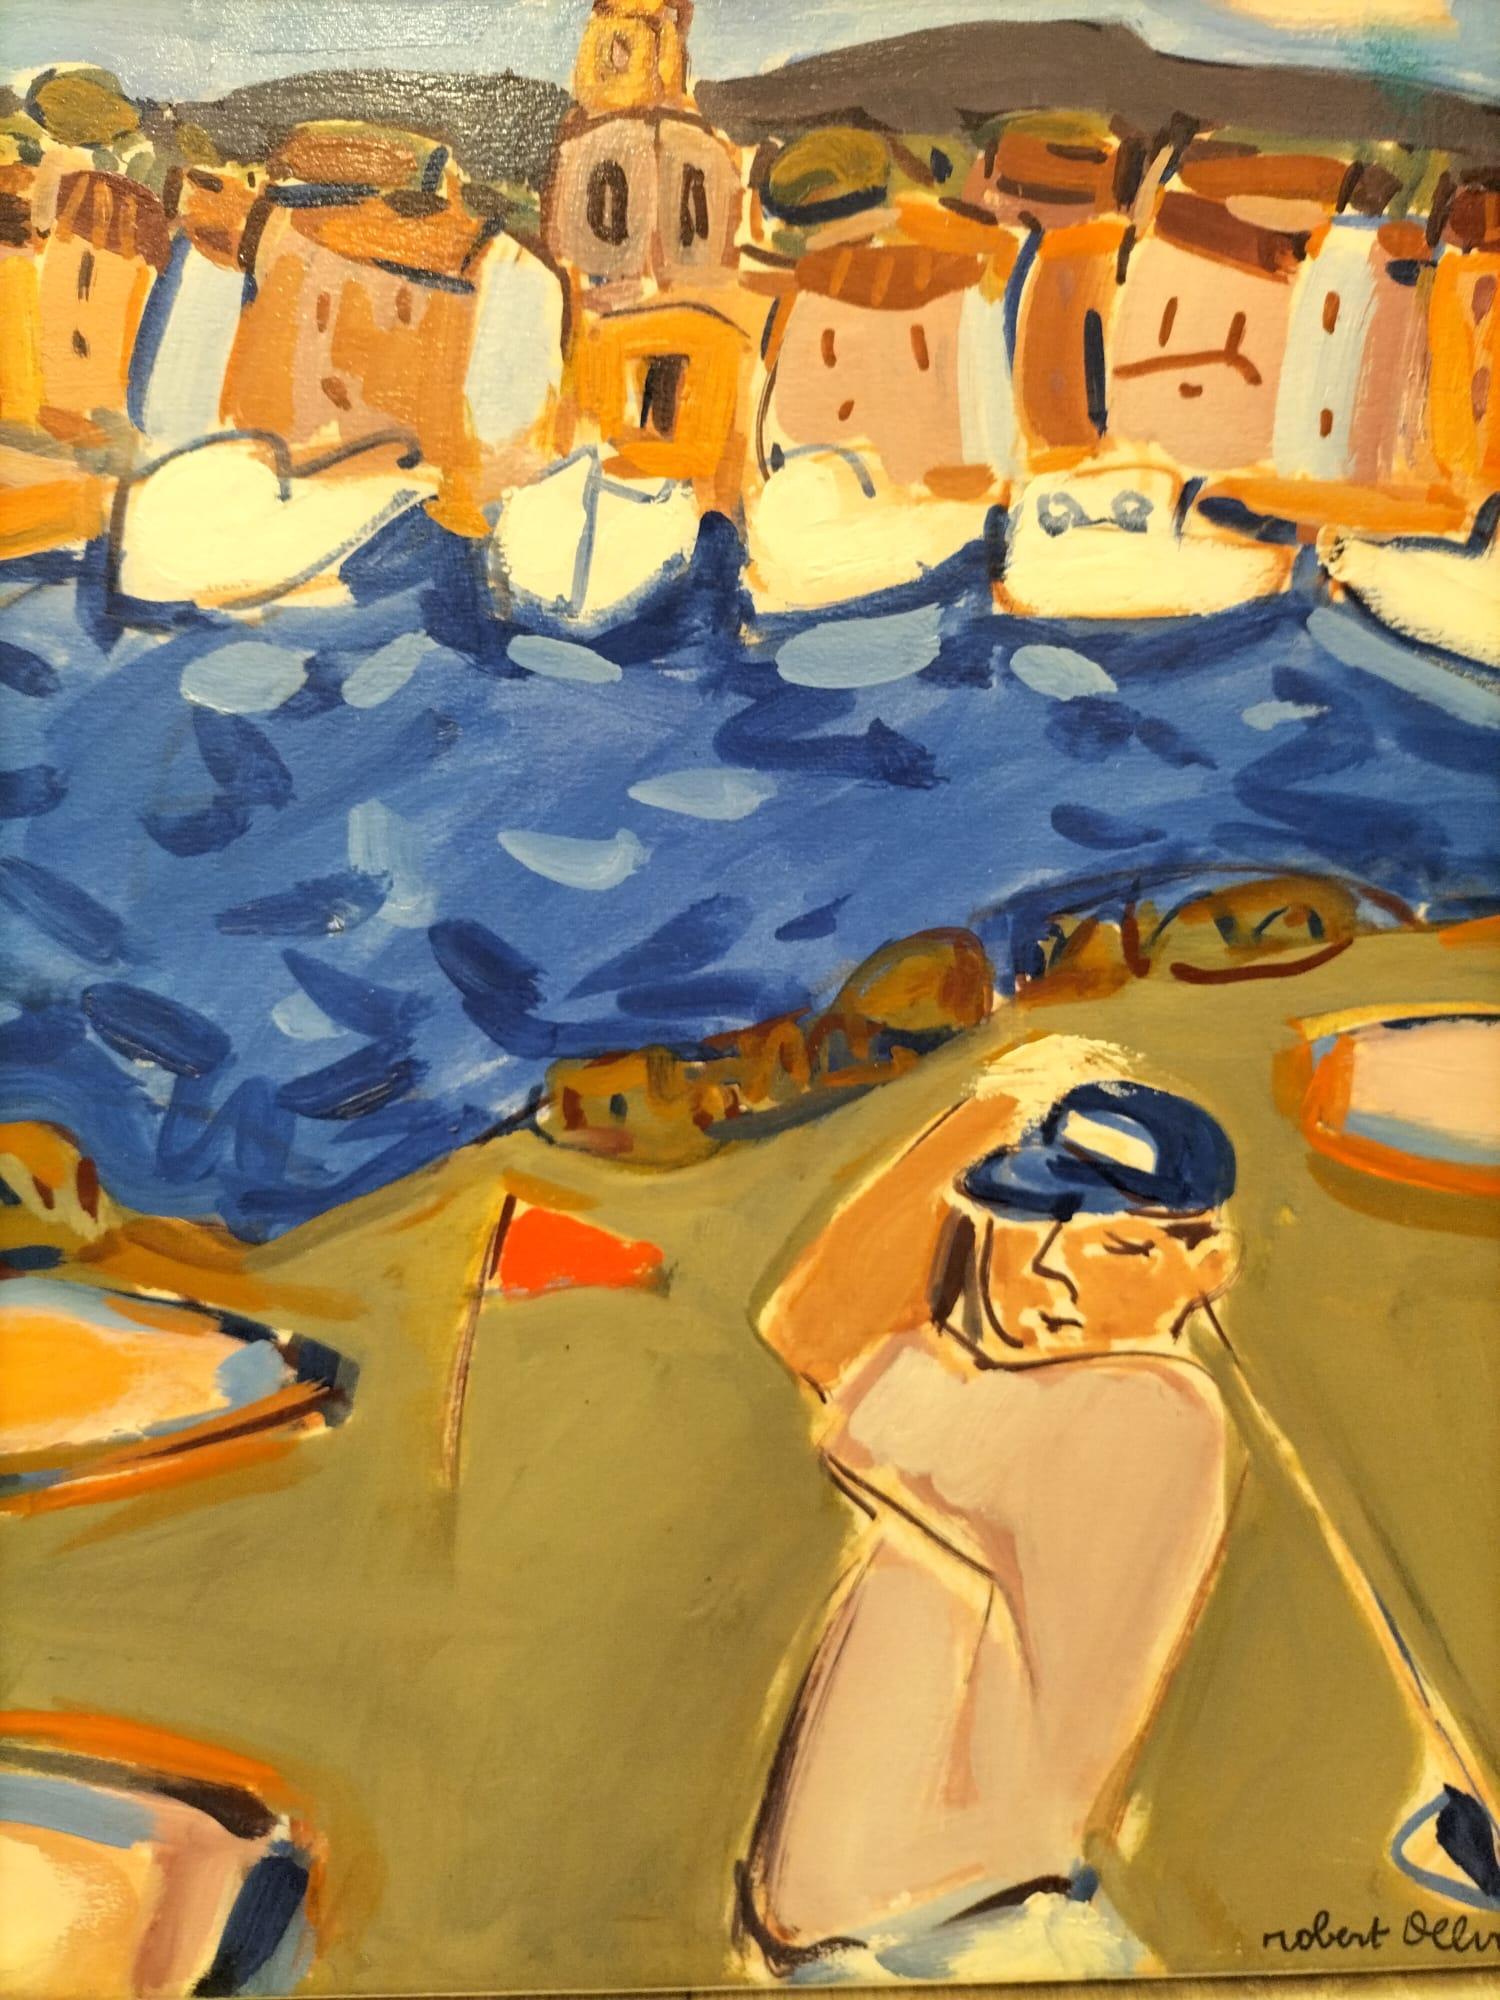 French Oil-on-Canvas Painting 'Golf in Saint Tropez' by Robert Delval (1934-) For Sale